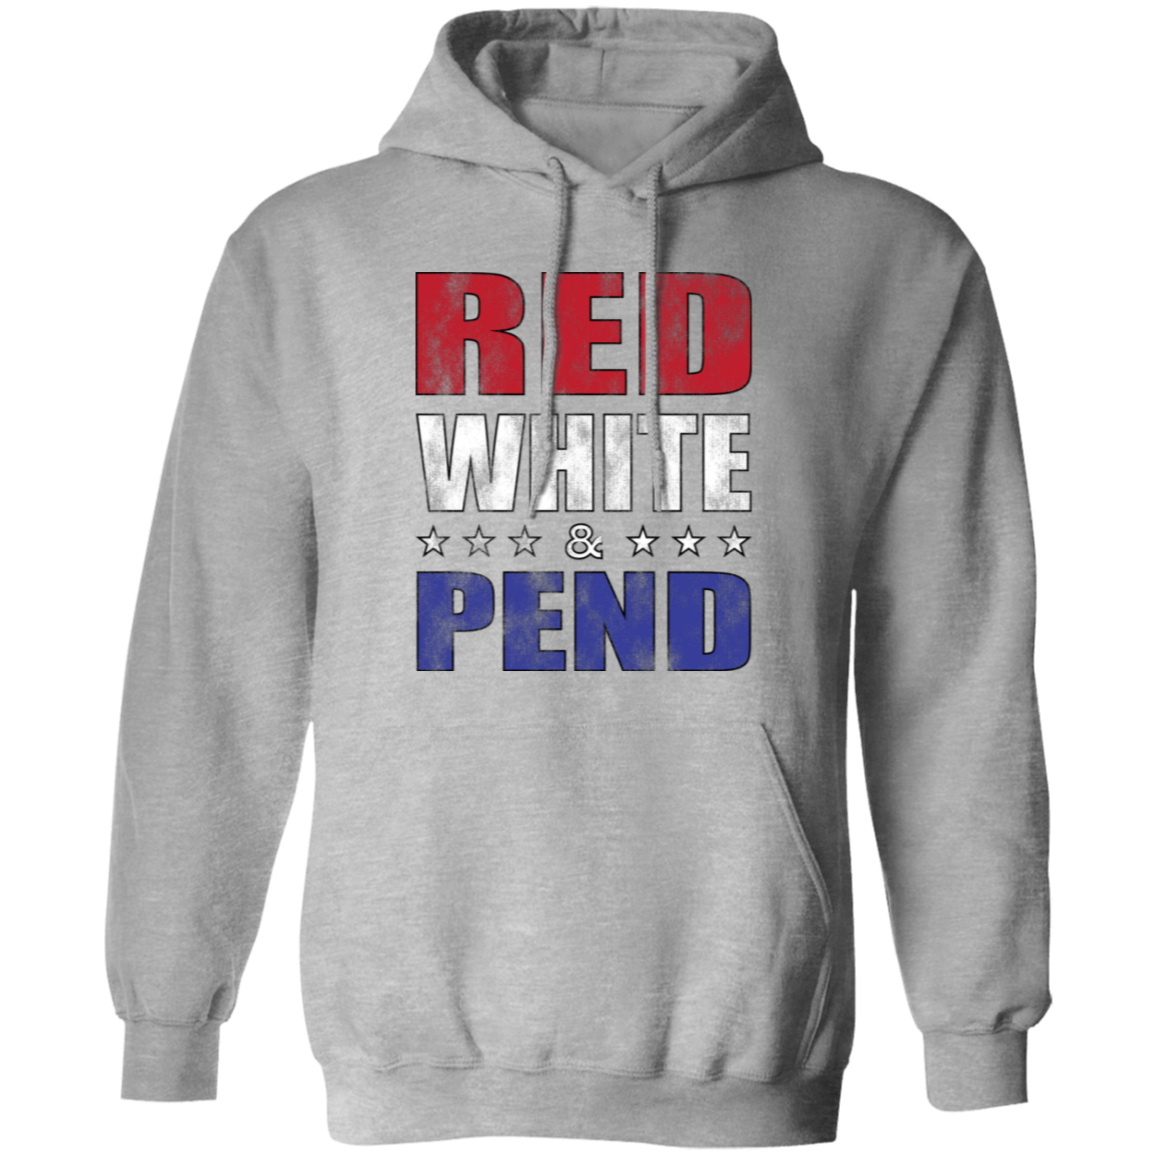 Red White & Pend Hoodie